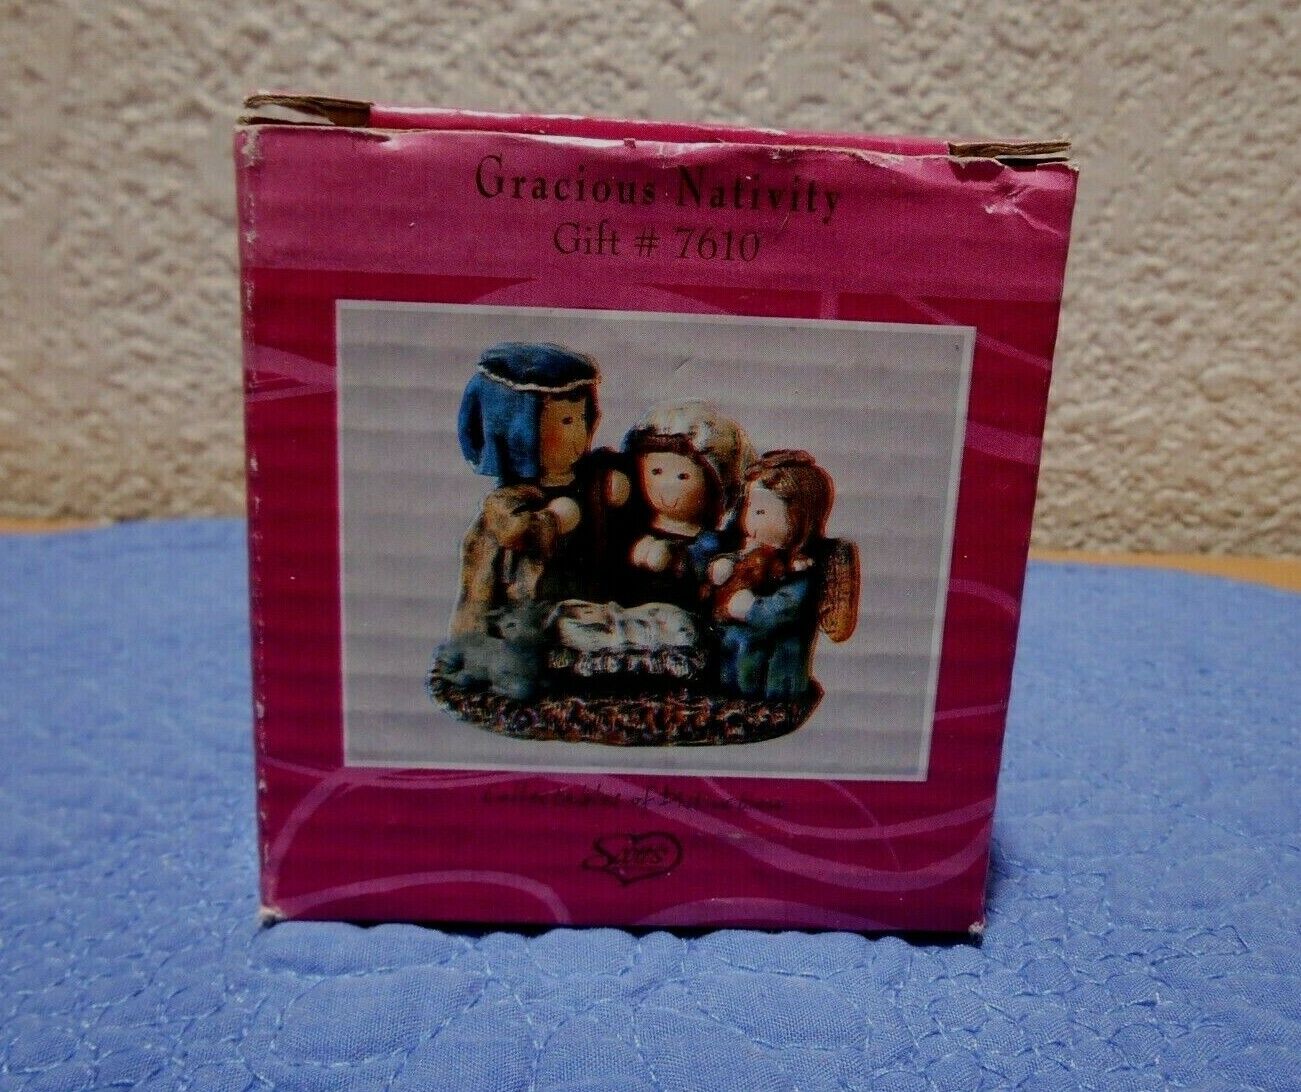 Scotts of Wisconsin Gracious Nativity Gift #7610 Collectables of Distinction